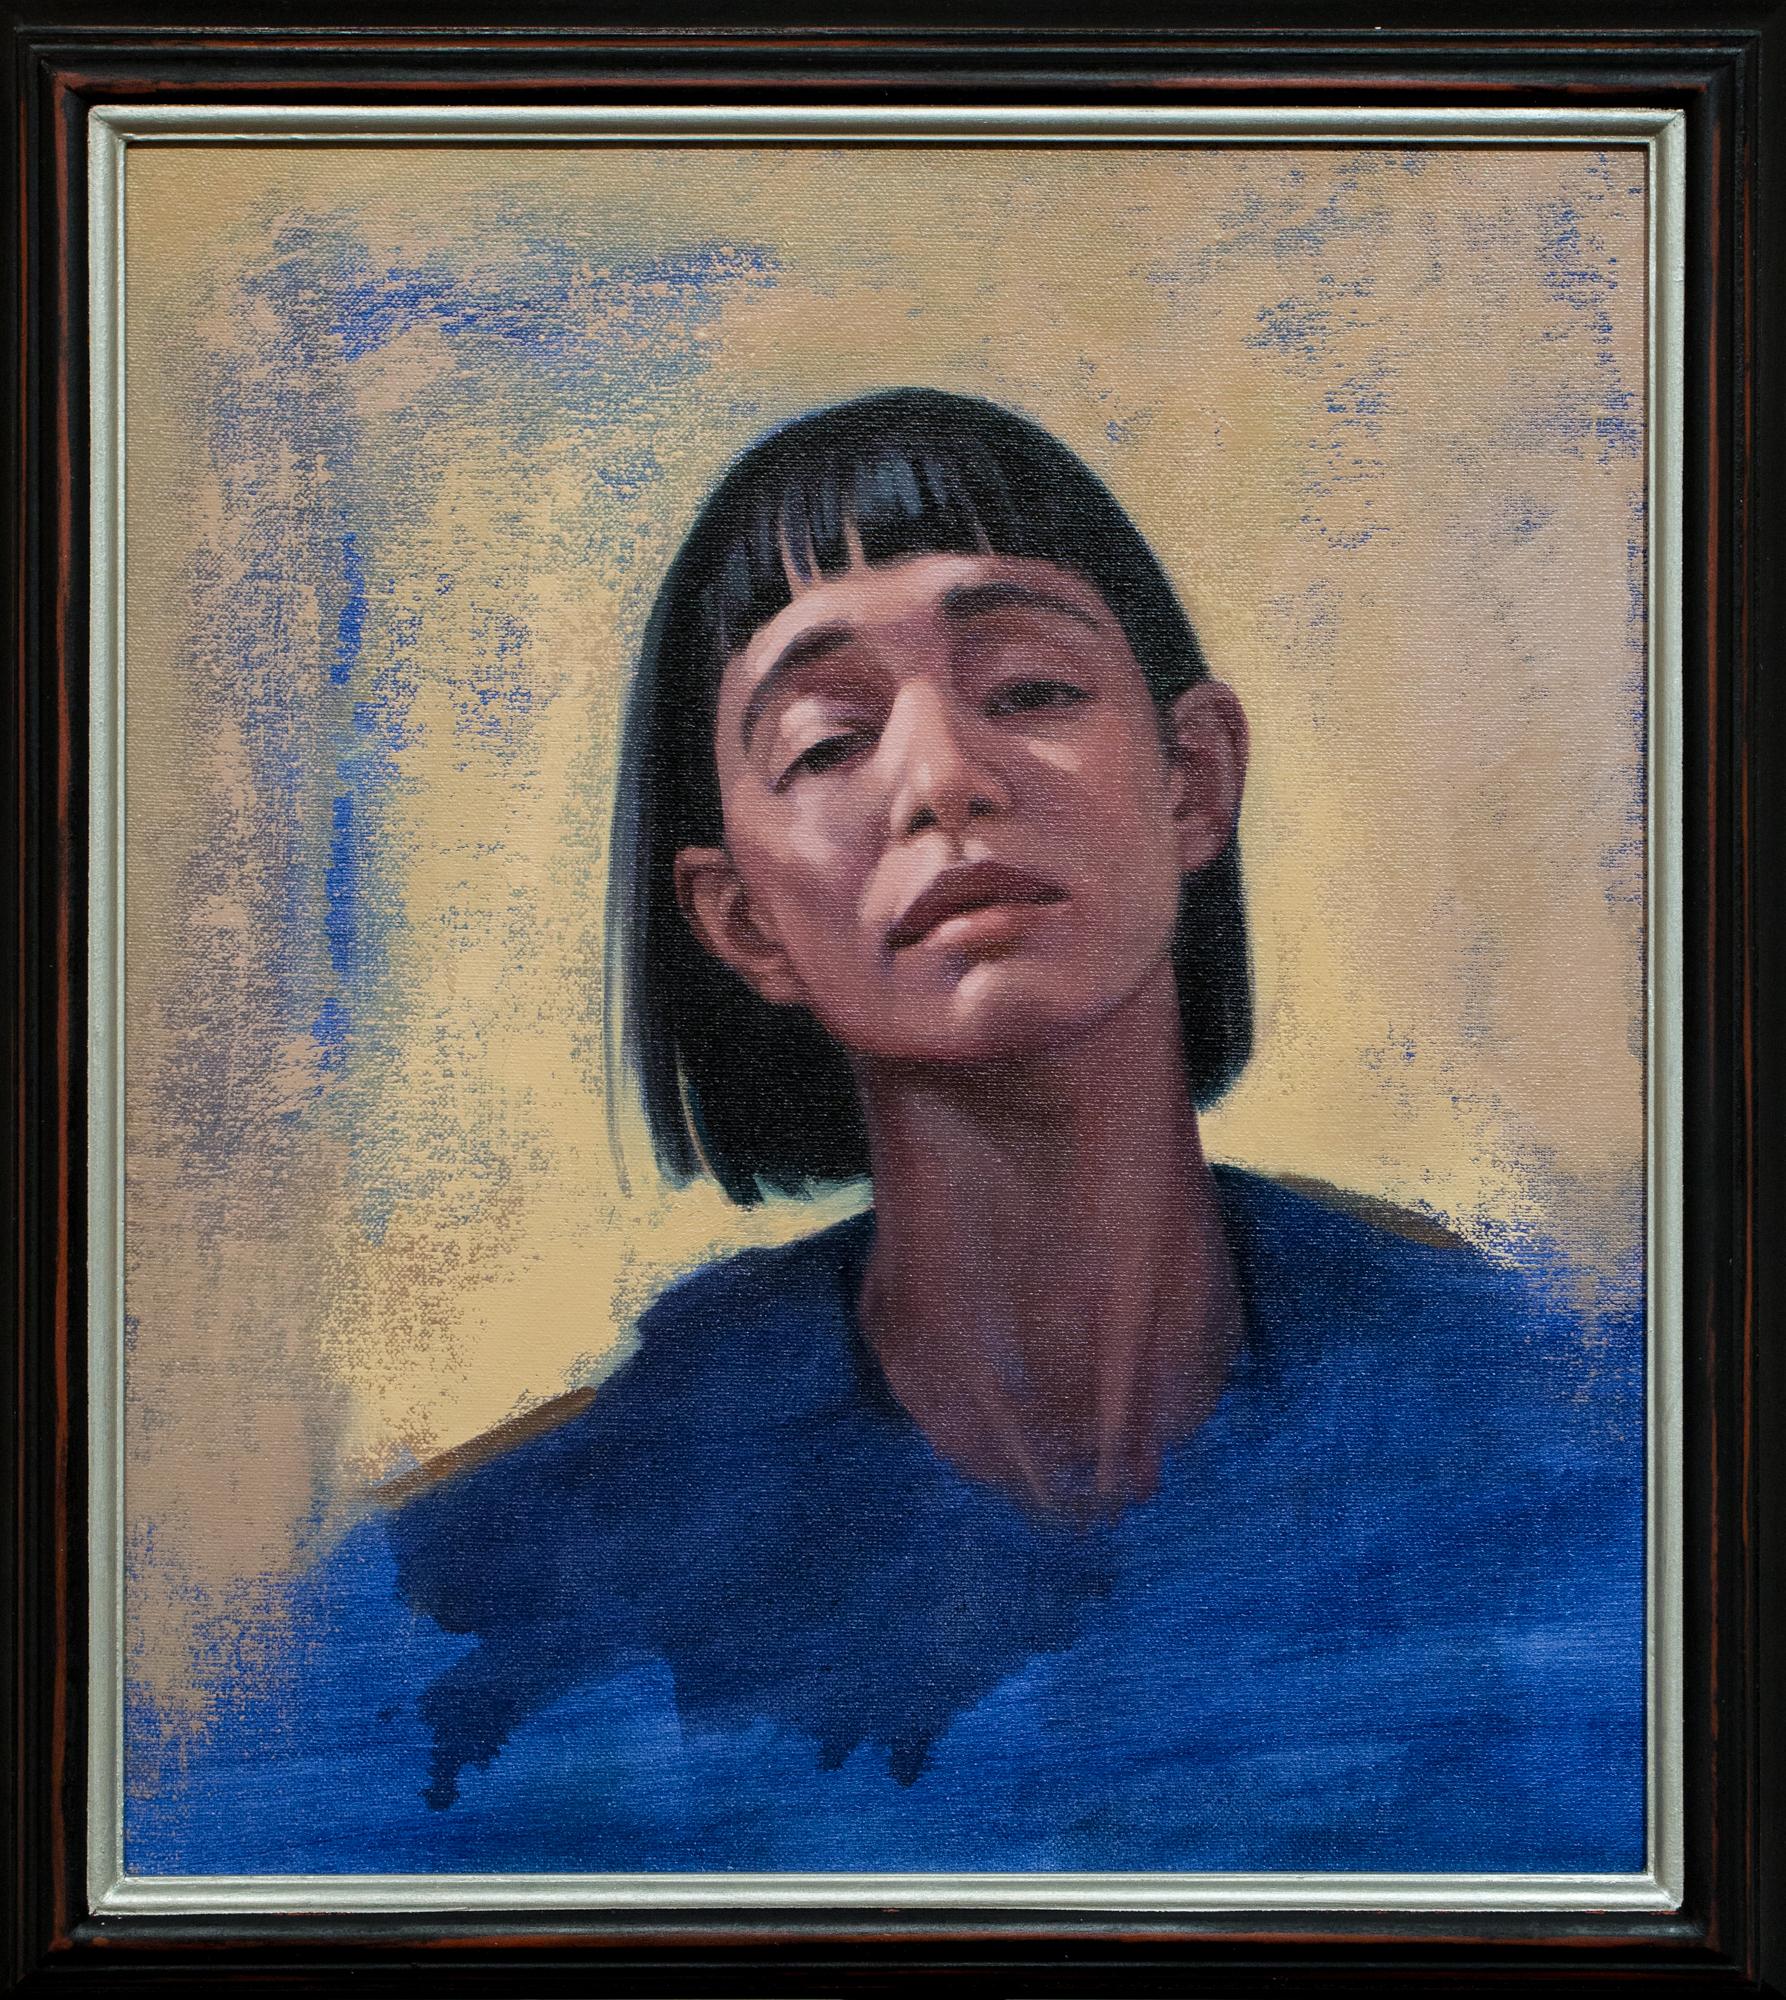 "What You See", Blue and Yellow Portrait Oil Painting